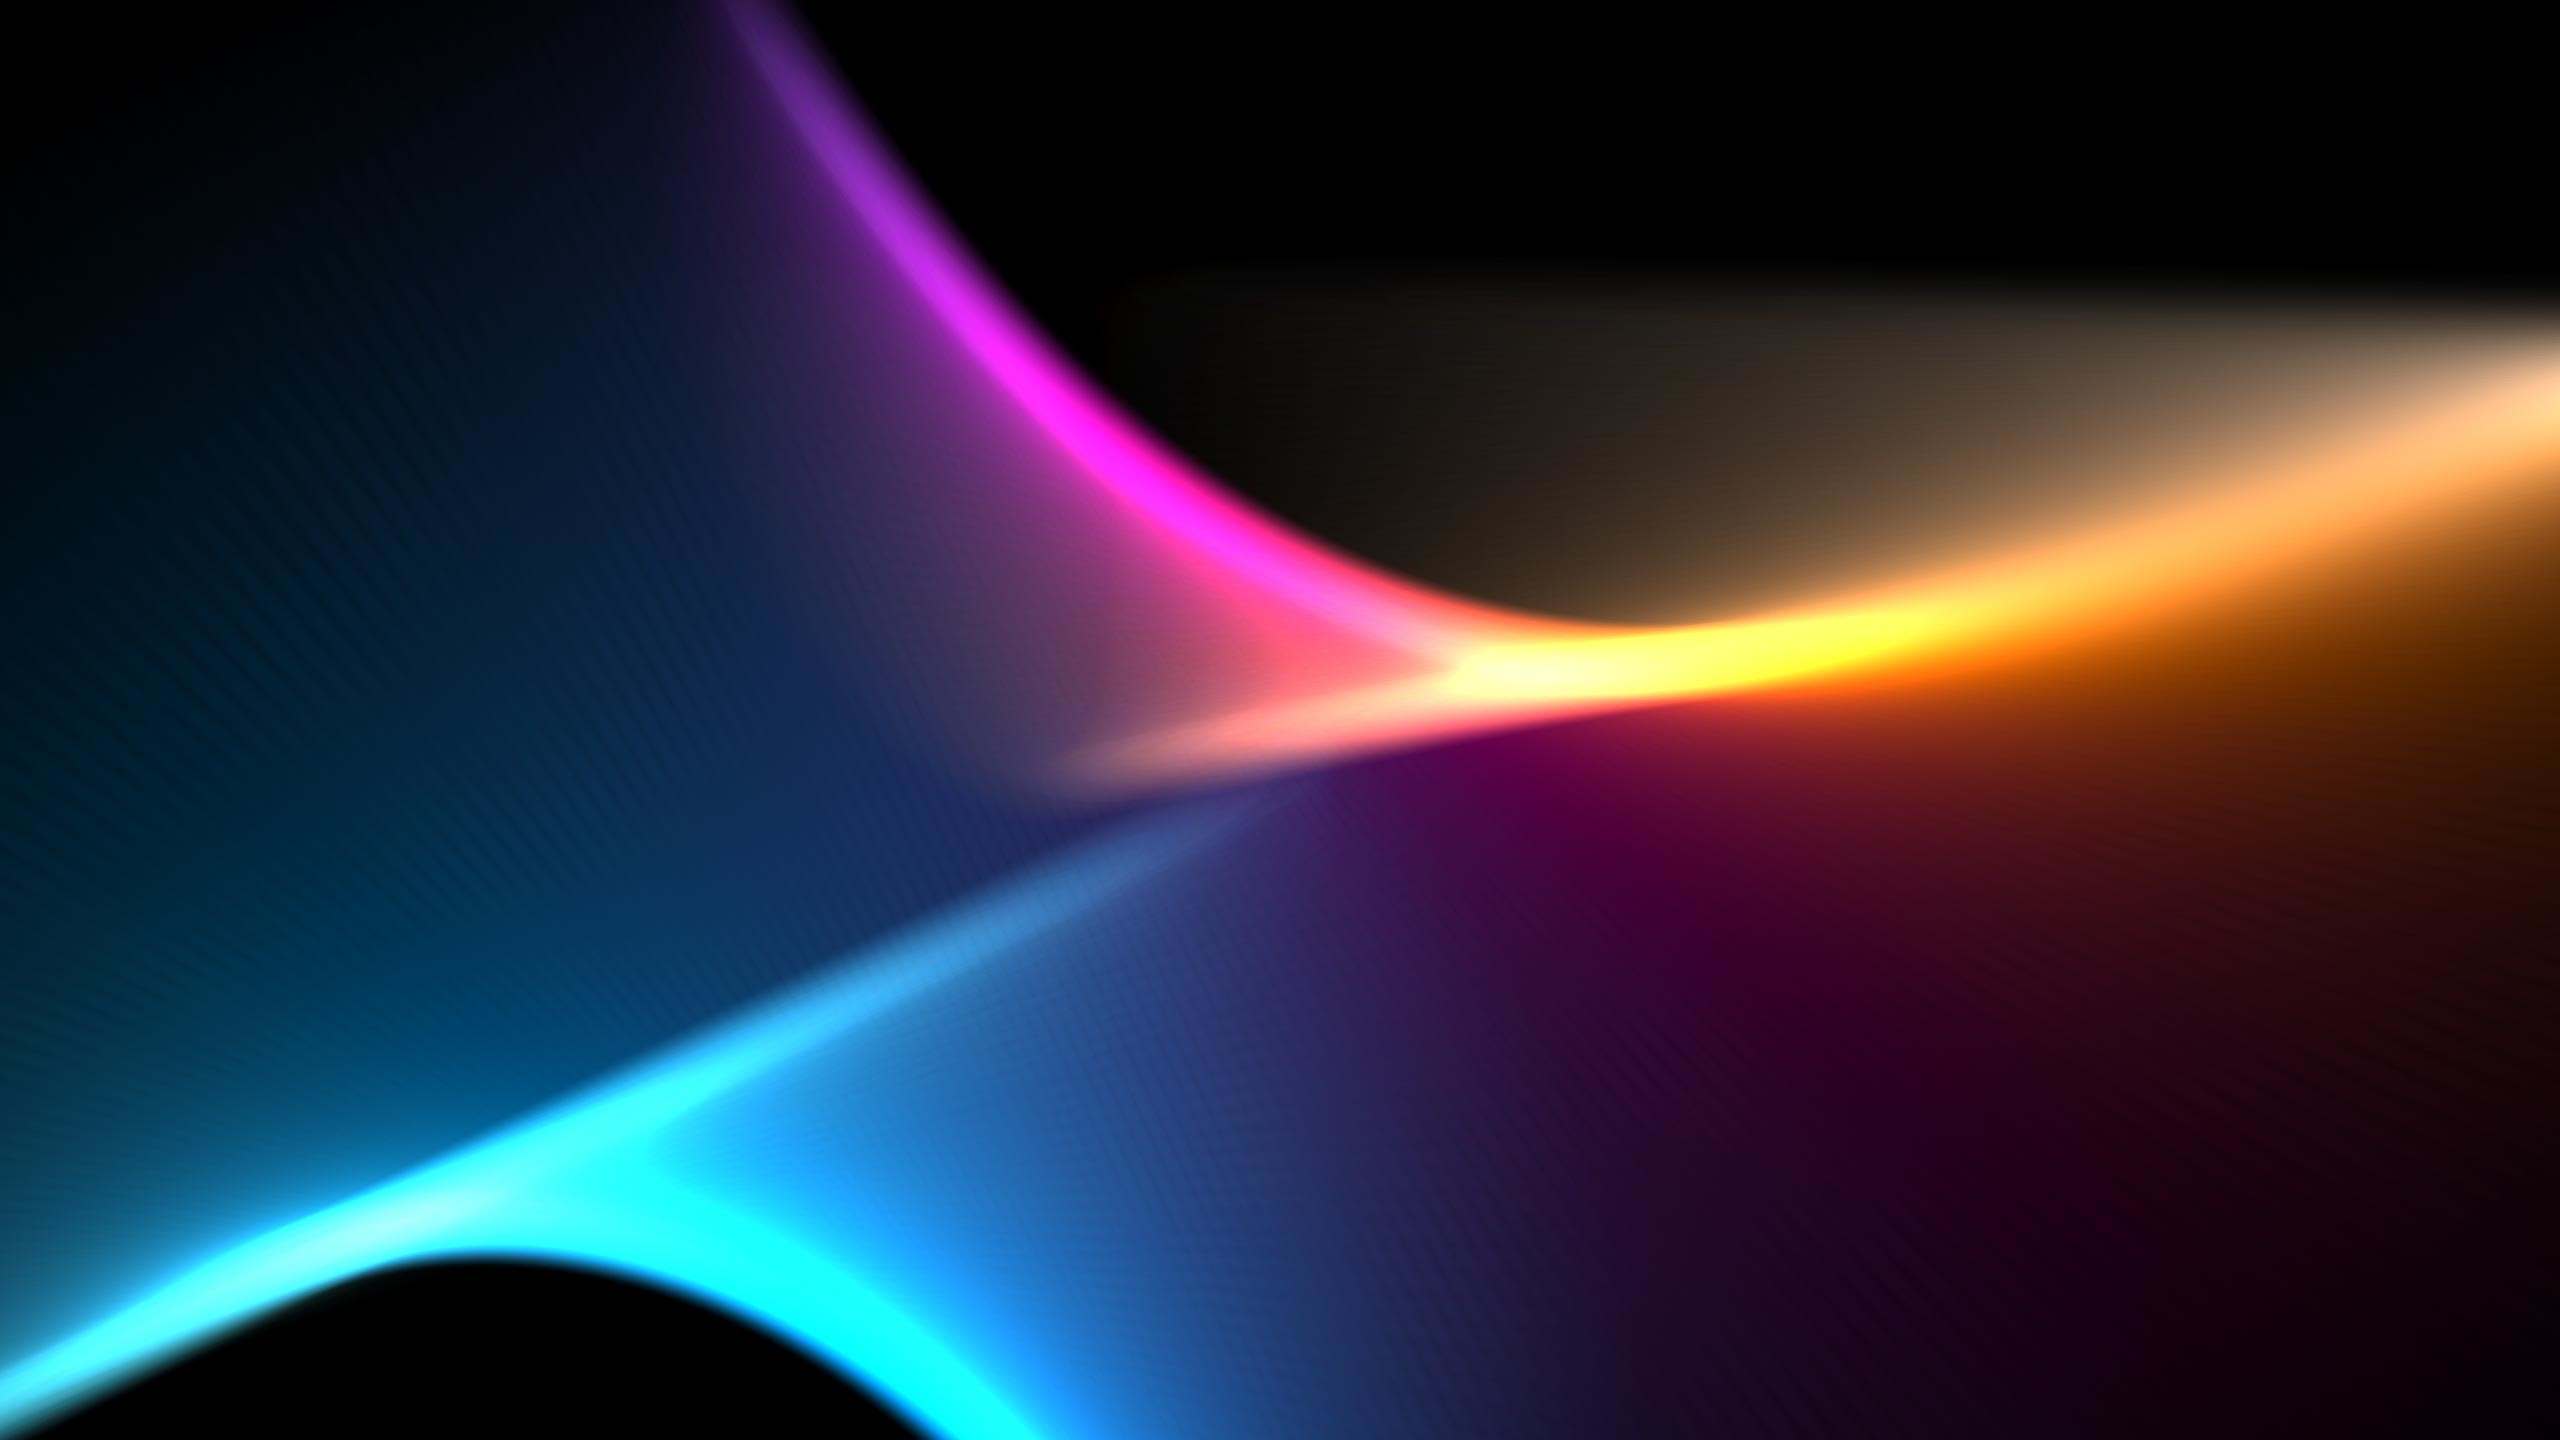 Soft Shines 3D. Soft Shines 3D is a live wallpaper and